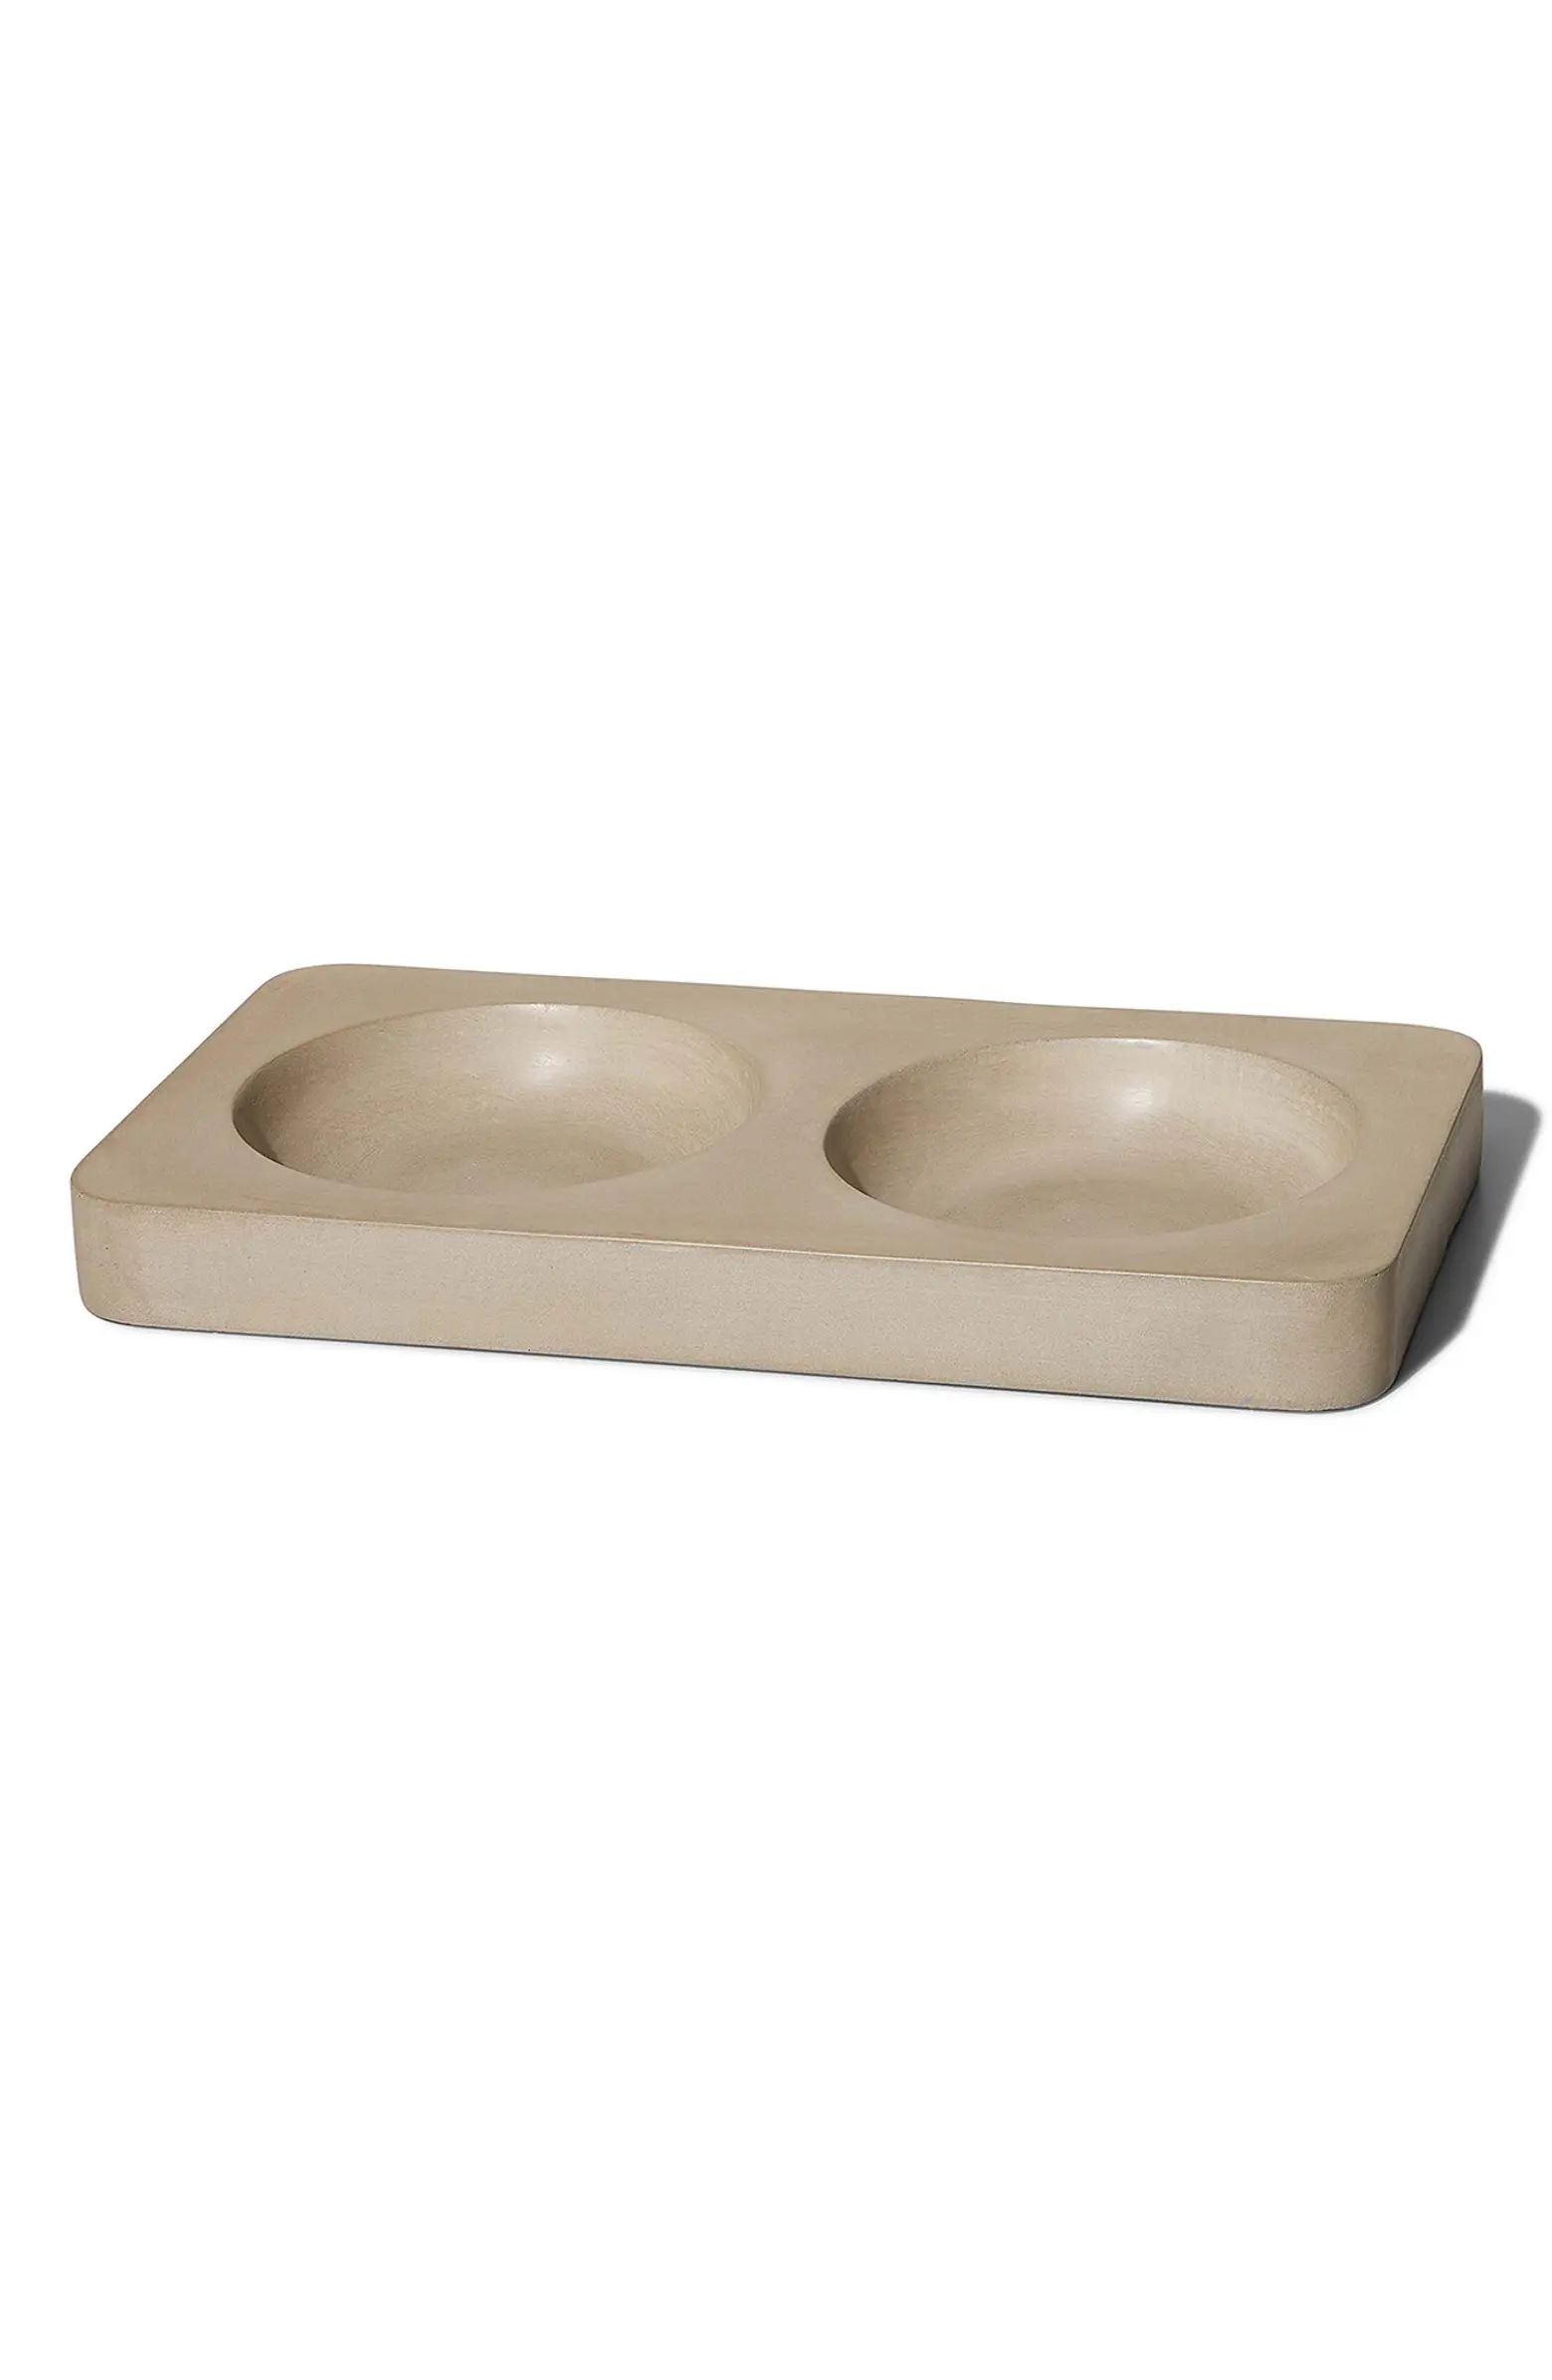 FELT AND FAT Small Concrete Pet Bowl Stand | Nordstrom | Nordstrom